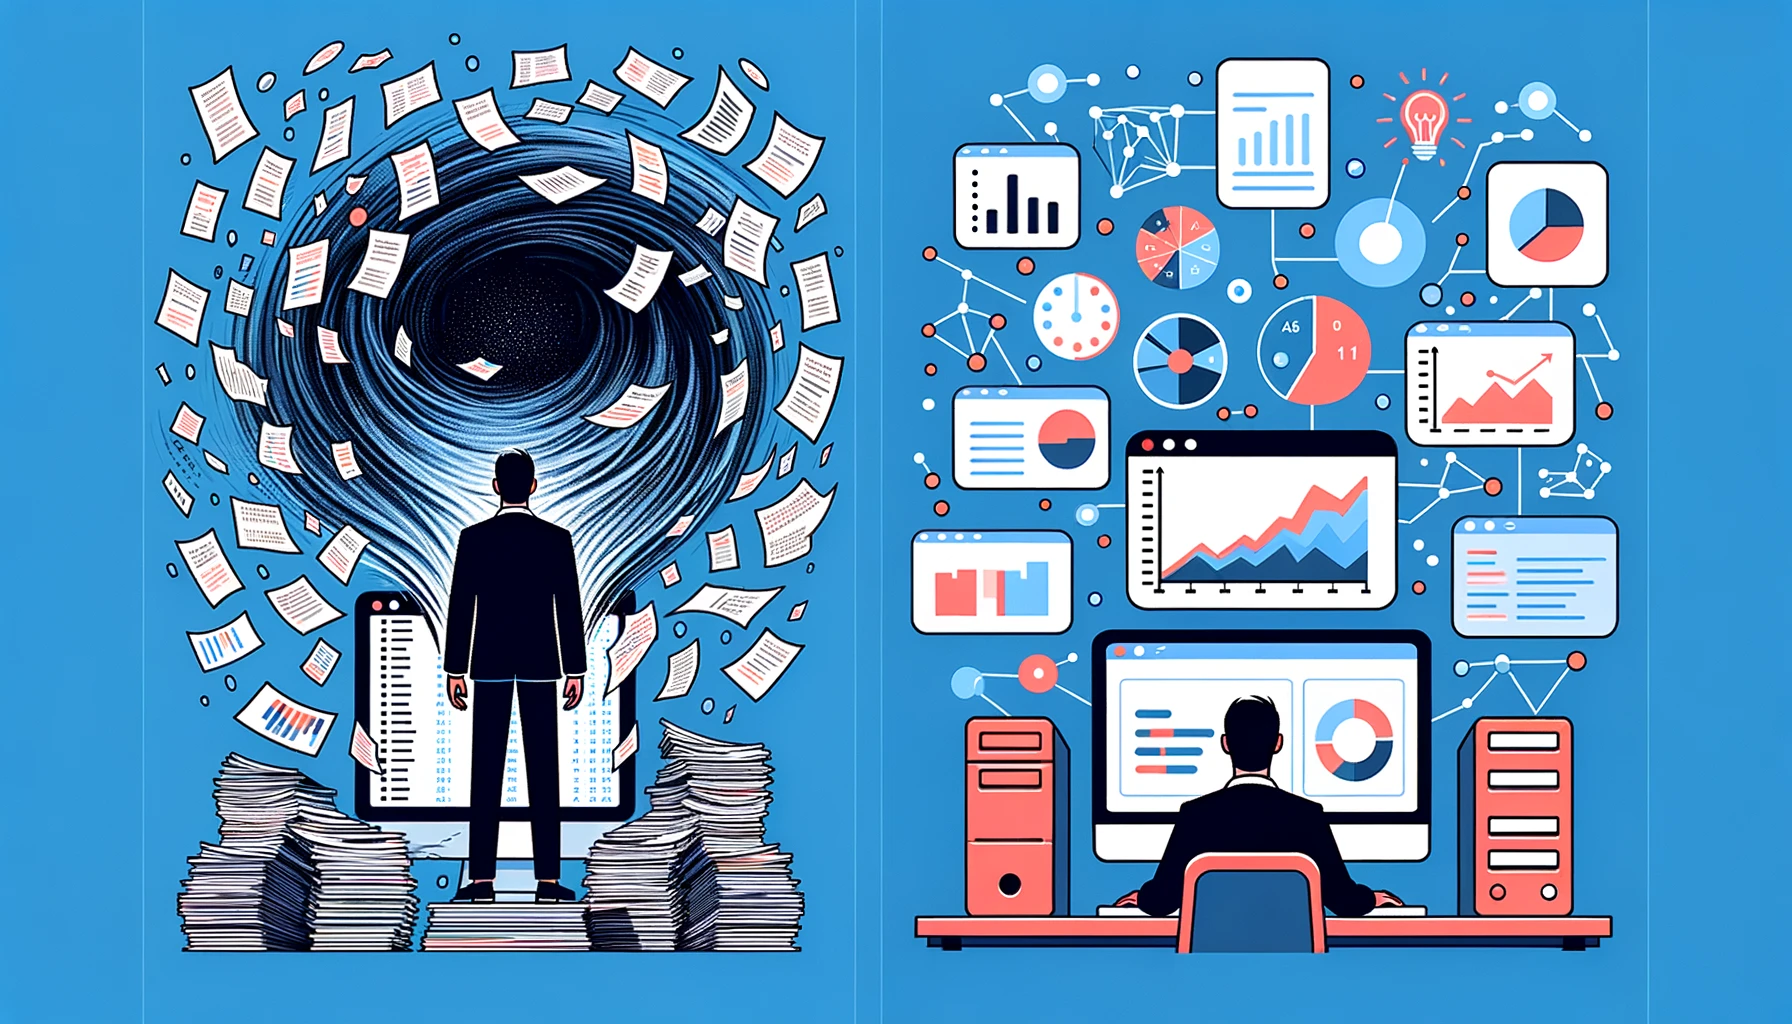 Illustration of Data Overwhelm vs. AI Clarity: On the left, a business person stands in a whirlwind of digital files, data points, and virtual charts, depicting the chaos of traditional data management. On the right, the same person, now at ease, is viewing a computer with advanced AI algorithms, statistical visualizations, and clarity brought by AI-powered tools.